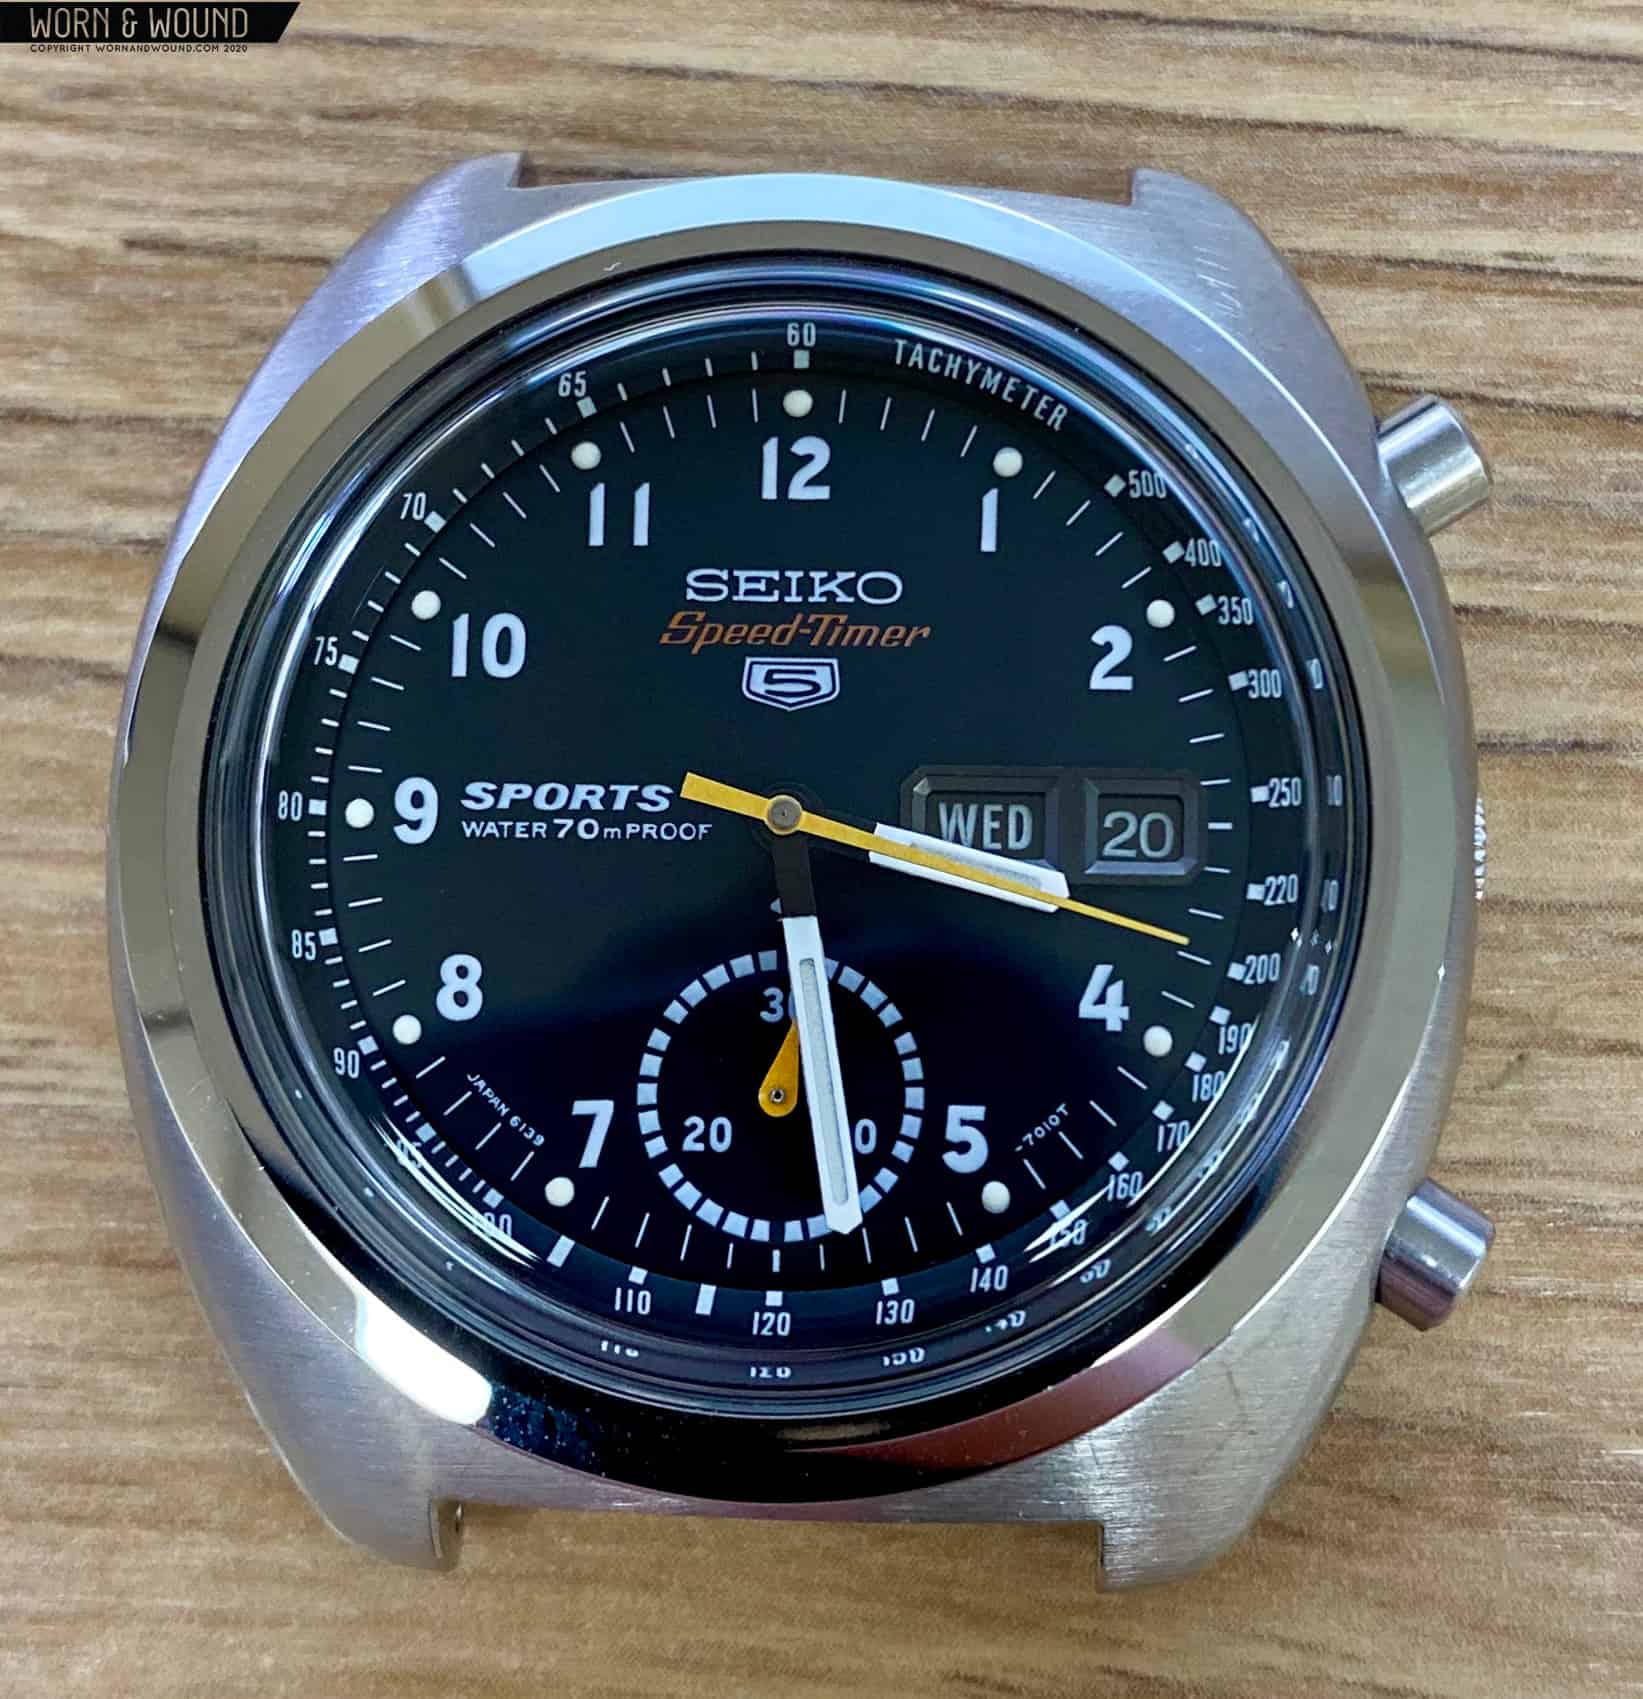 Watchmaker's Bench: Breaking Down a Seiko 6139 Chronograph - Worn & Wound